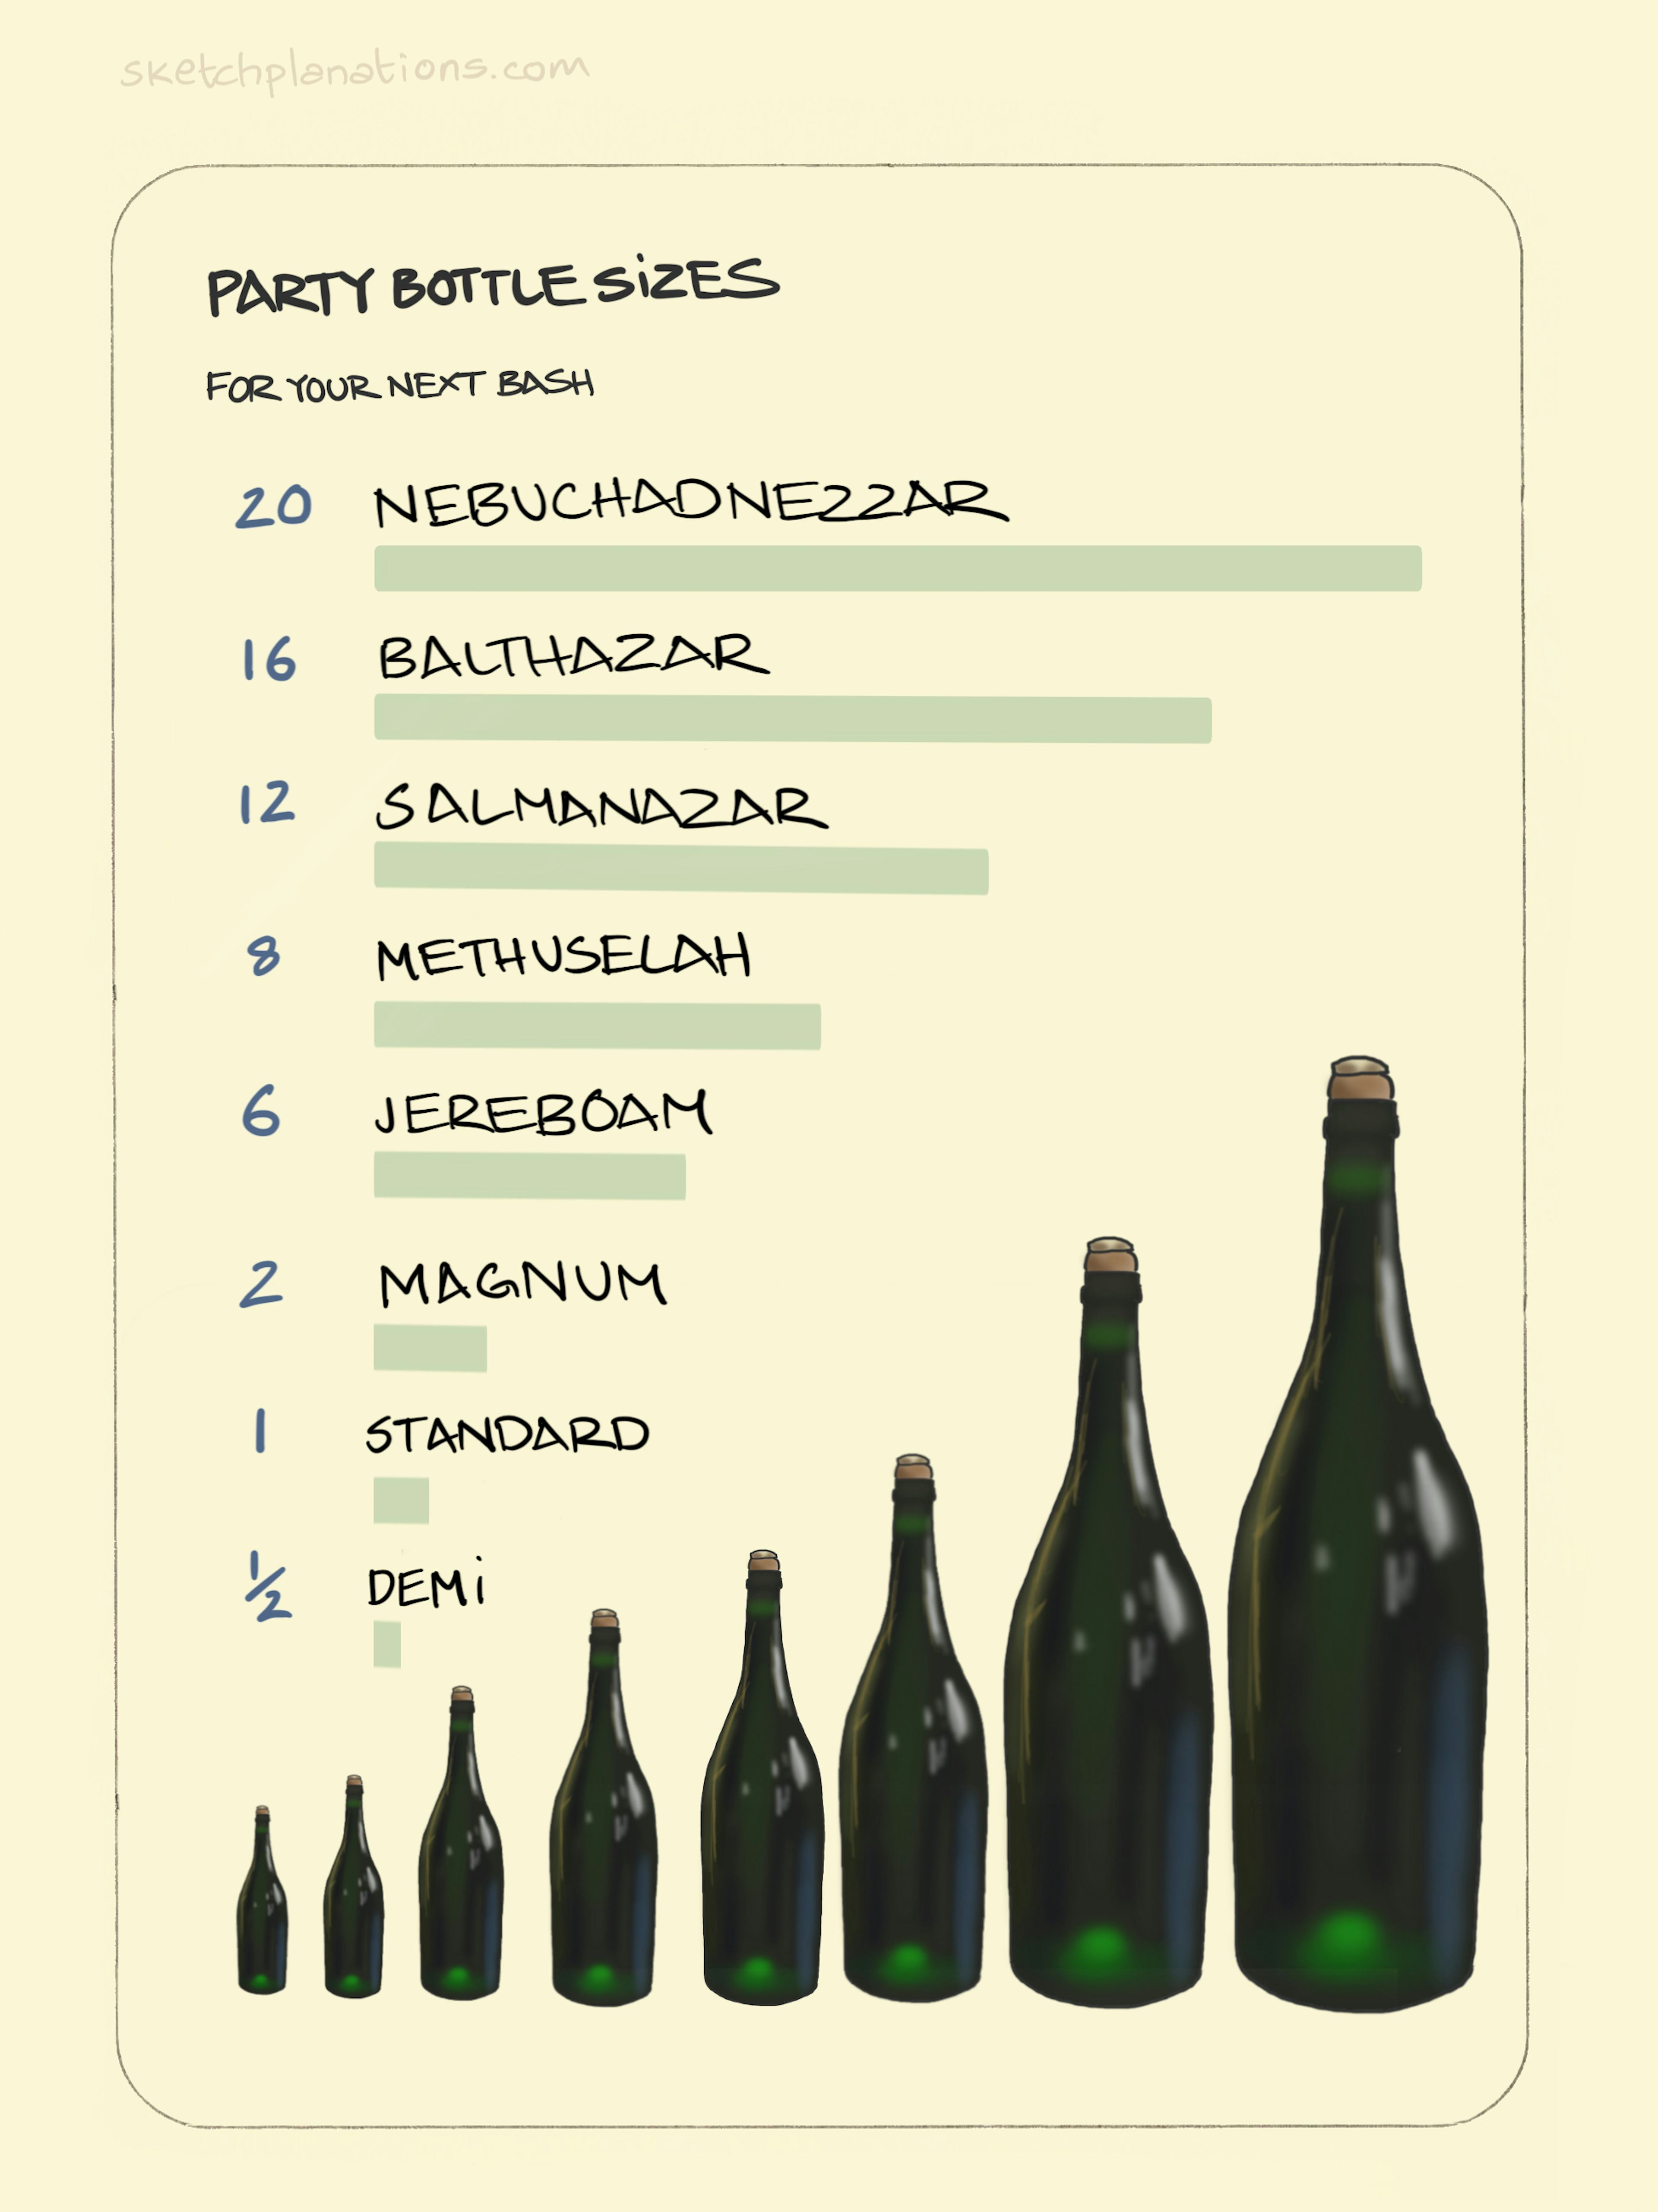 Party Bottle Sizes illustration: a series of increasingly large green glass bottles are shown in a row with their formal names and comparative size in relation to a standard wine bottle. From a Demi (half a standard bottle) to a Nebuchadnezzar (20 standard bottles). 